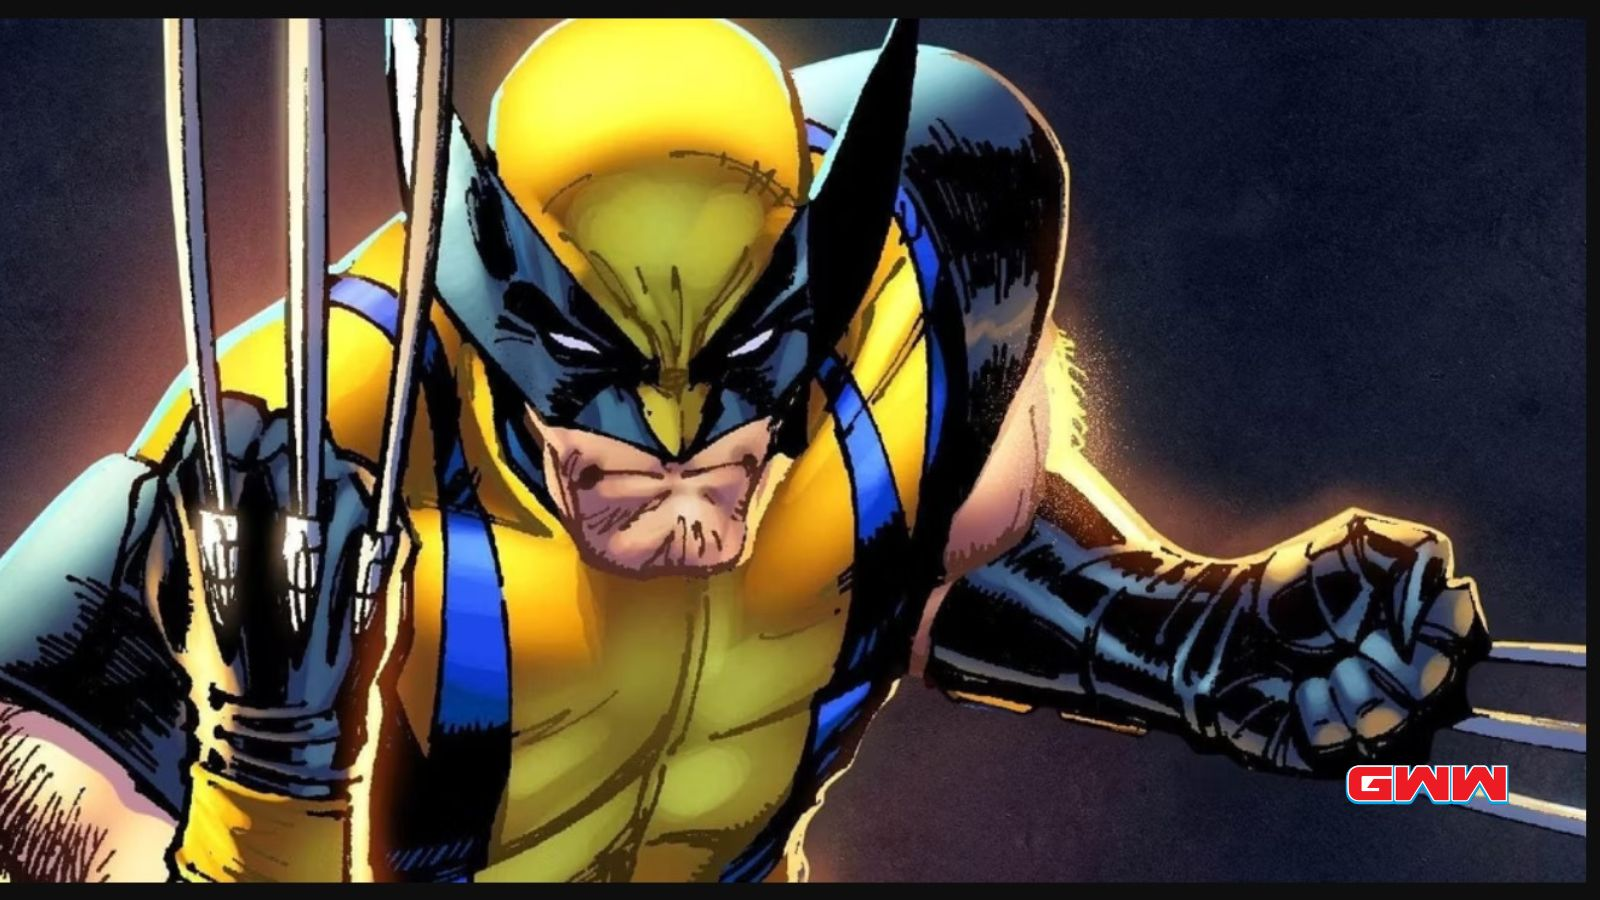 Wolverine wallpaper: high-definition image featuring Wolverine, the popular comic book character.